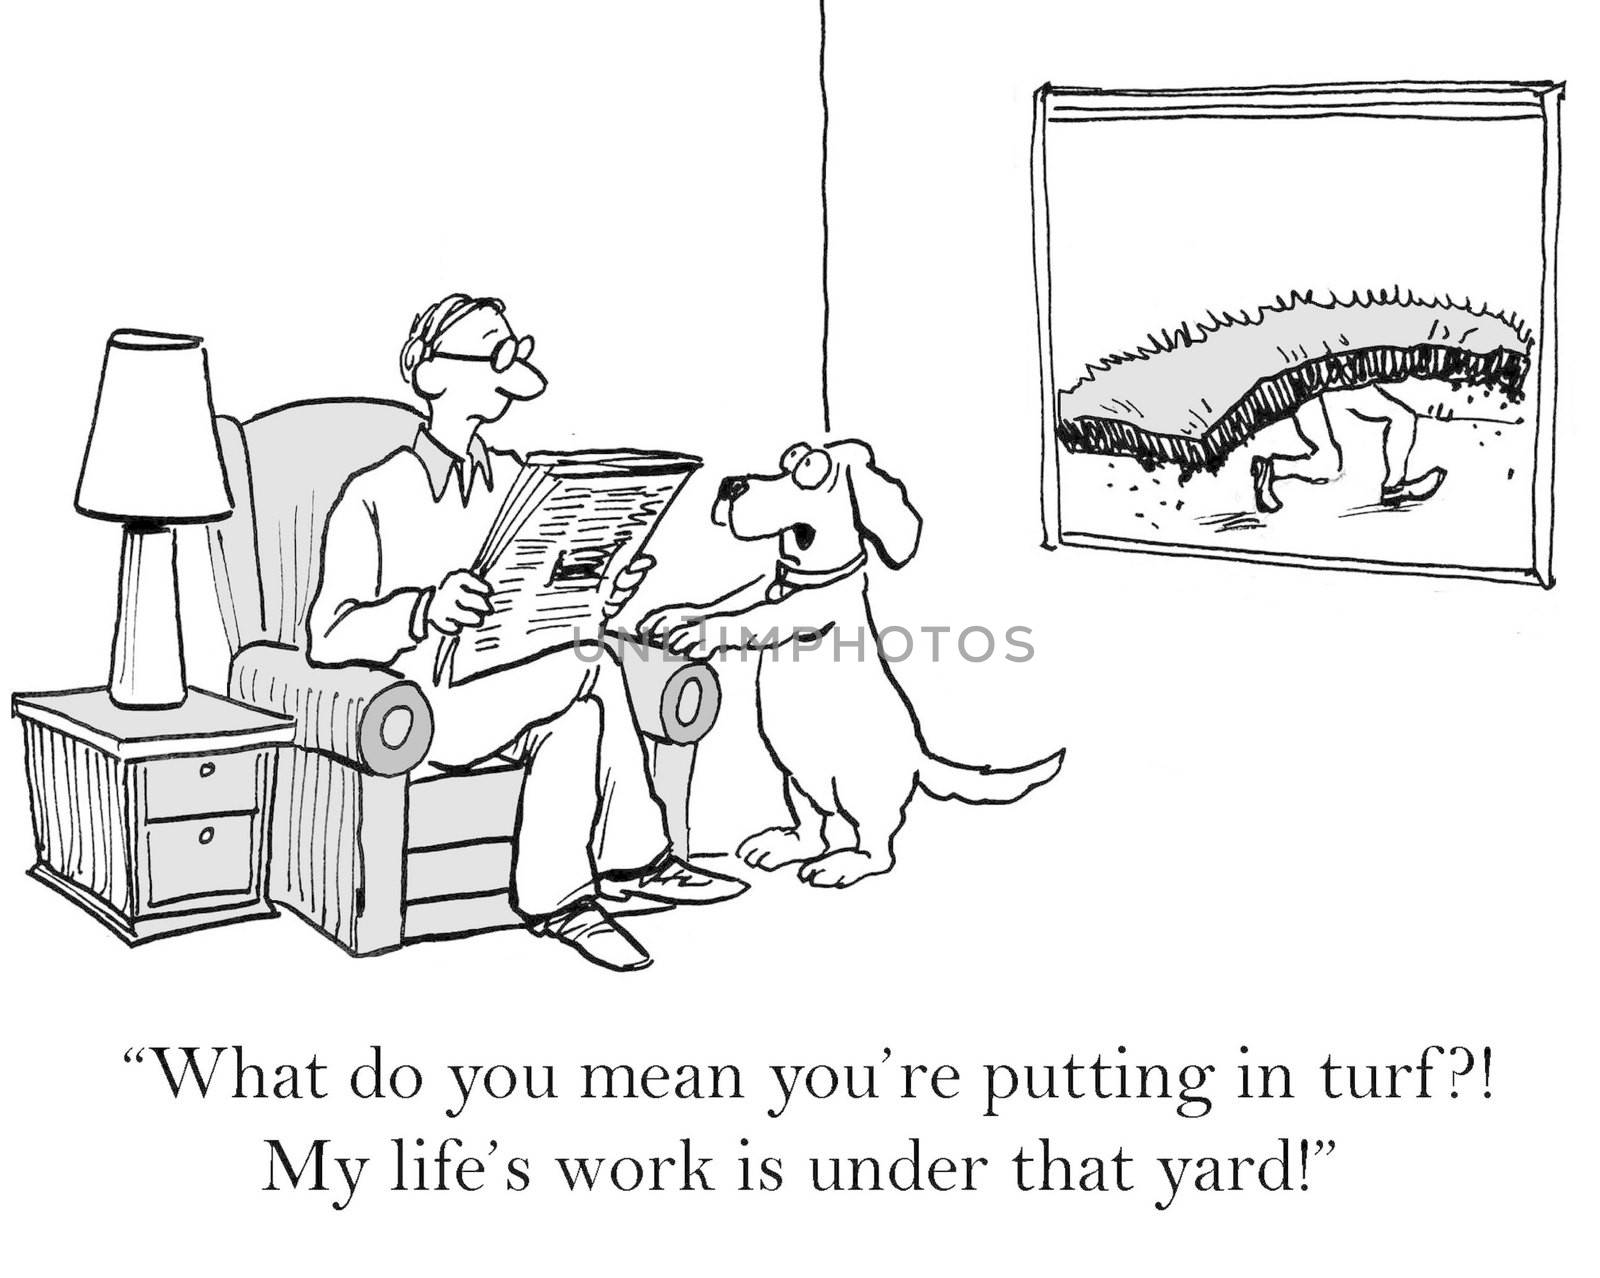 "What do you mean you're putting in turf?! My life's work is under that yard!"